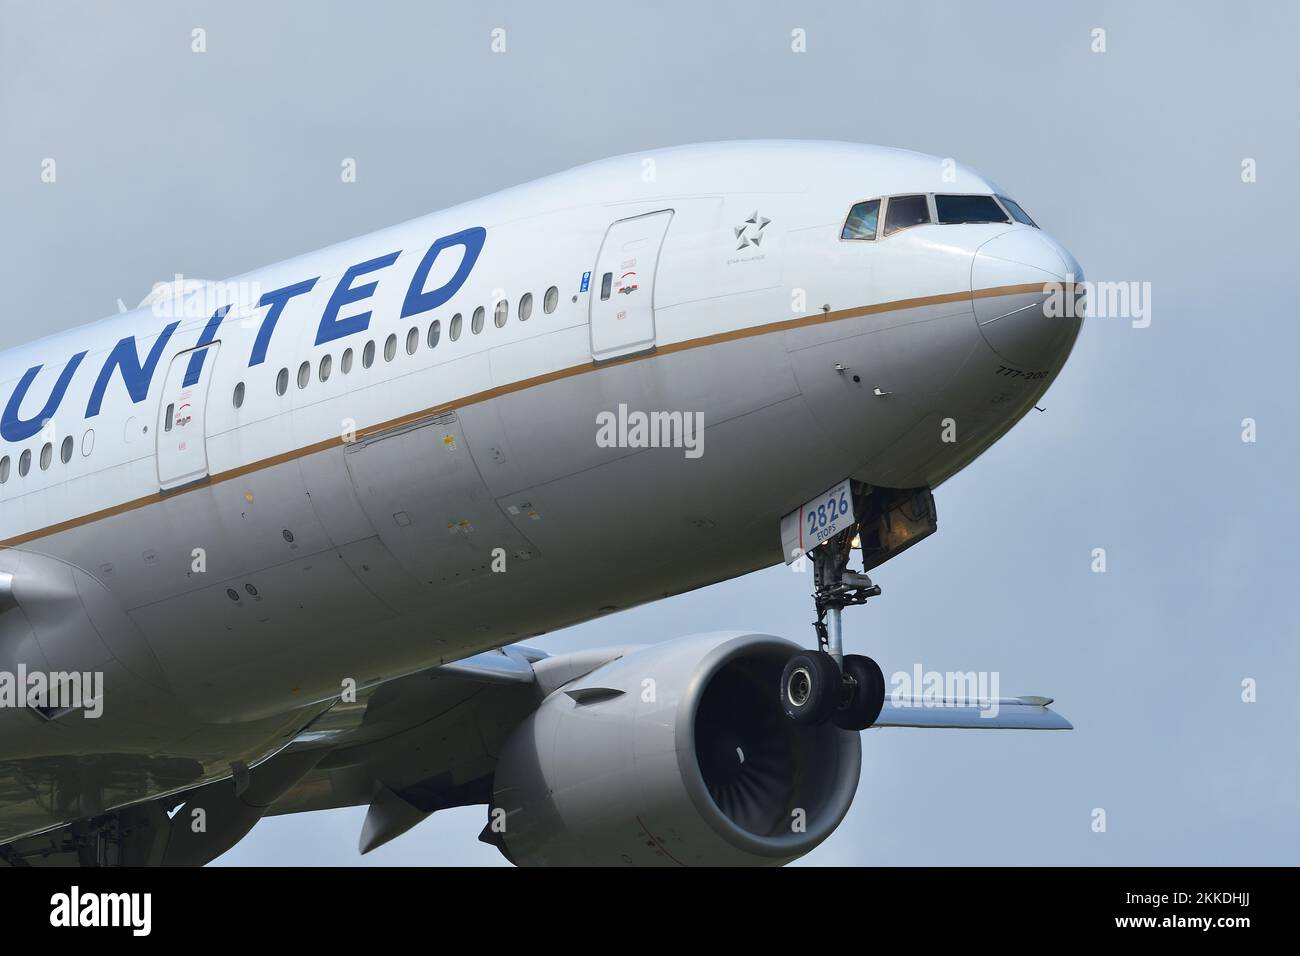 Chiba Prefecture, Japan - May 05, 2019: United Airlines Boeing B777-200ER (N226UA) passenger plane. Stock Photo